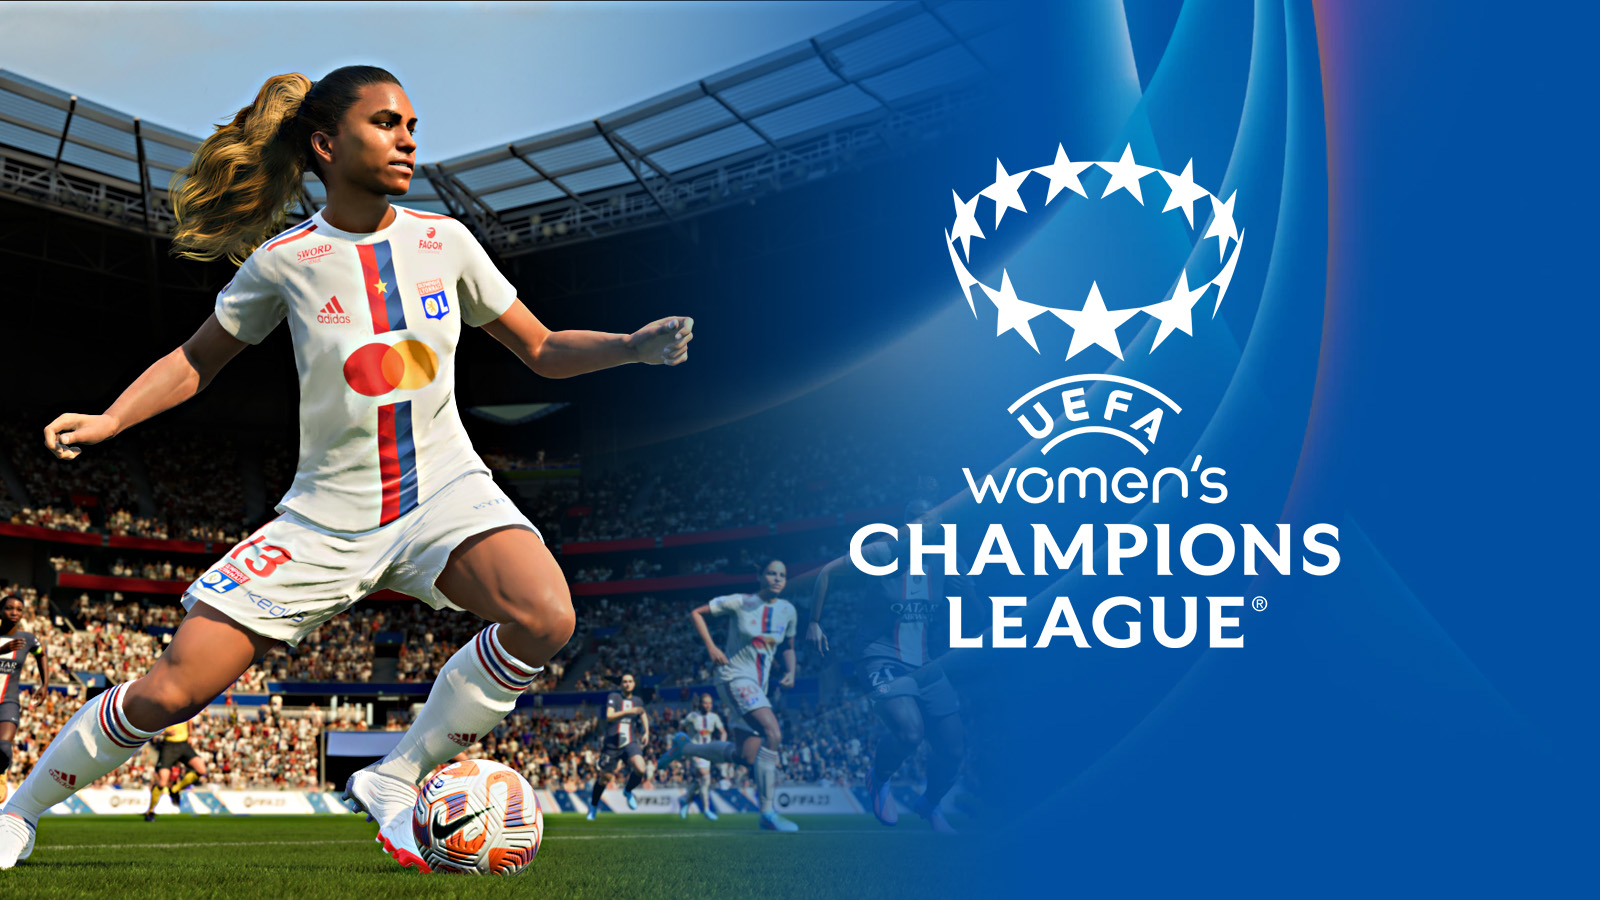 FIFA 23 reveals itself, showing off new inclusions likes Women's leagues  and cross-play — Maxi-Geek